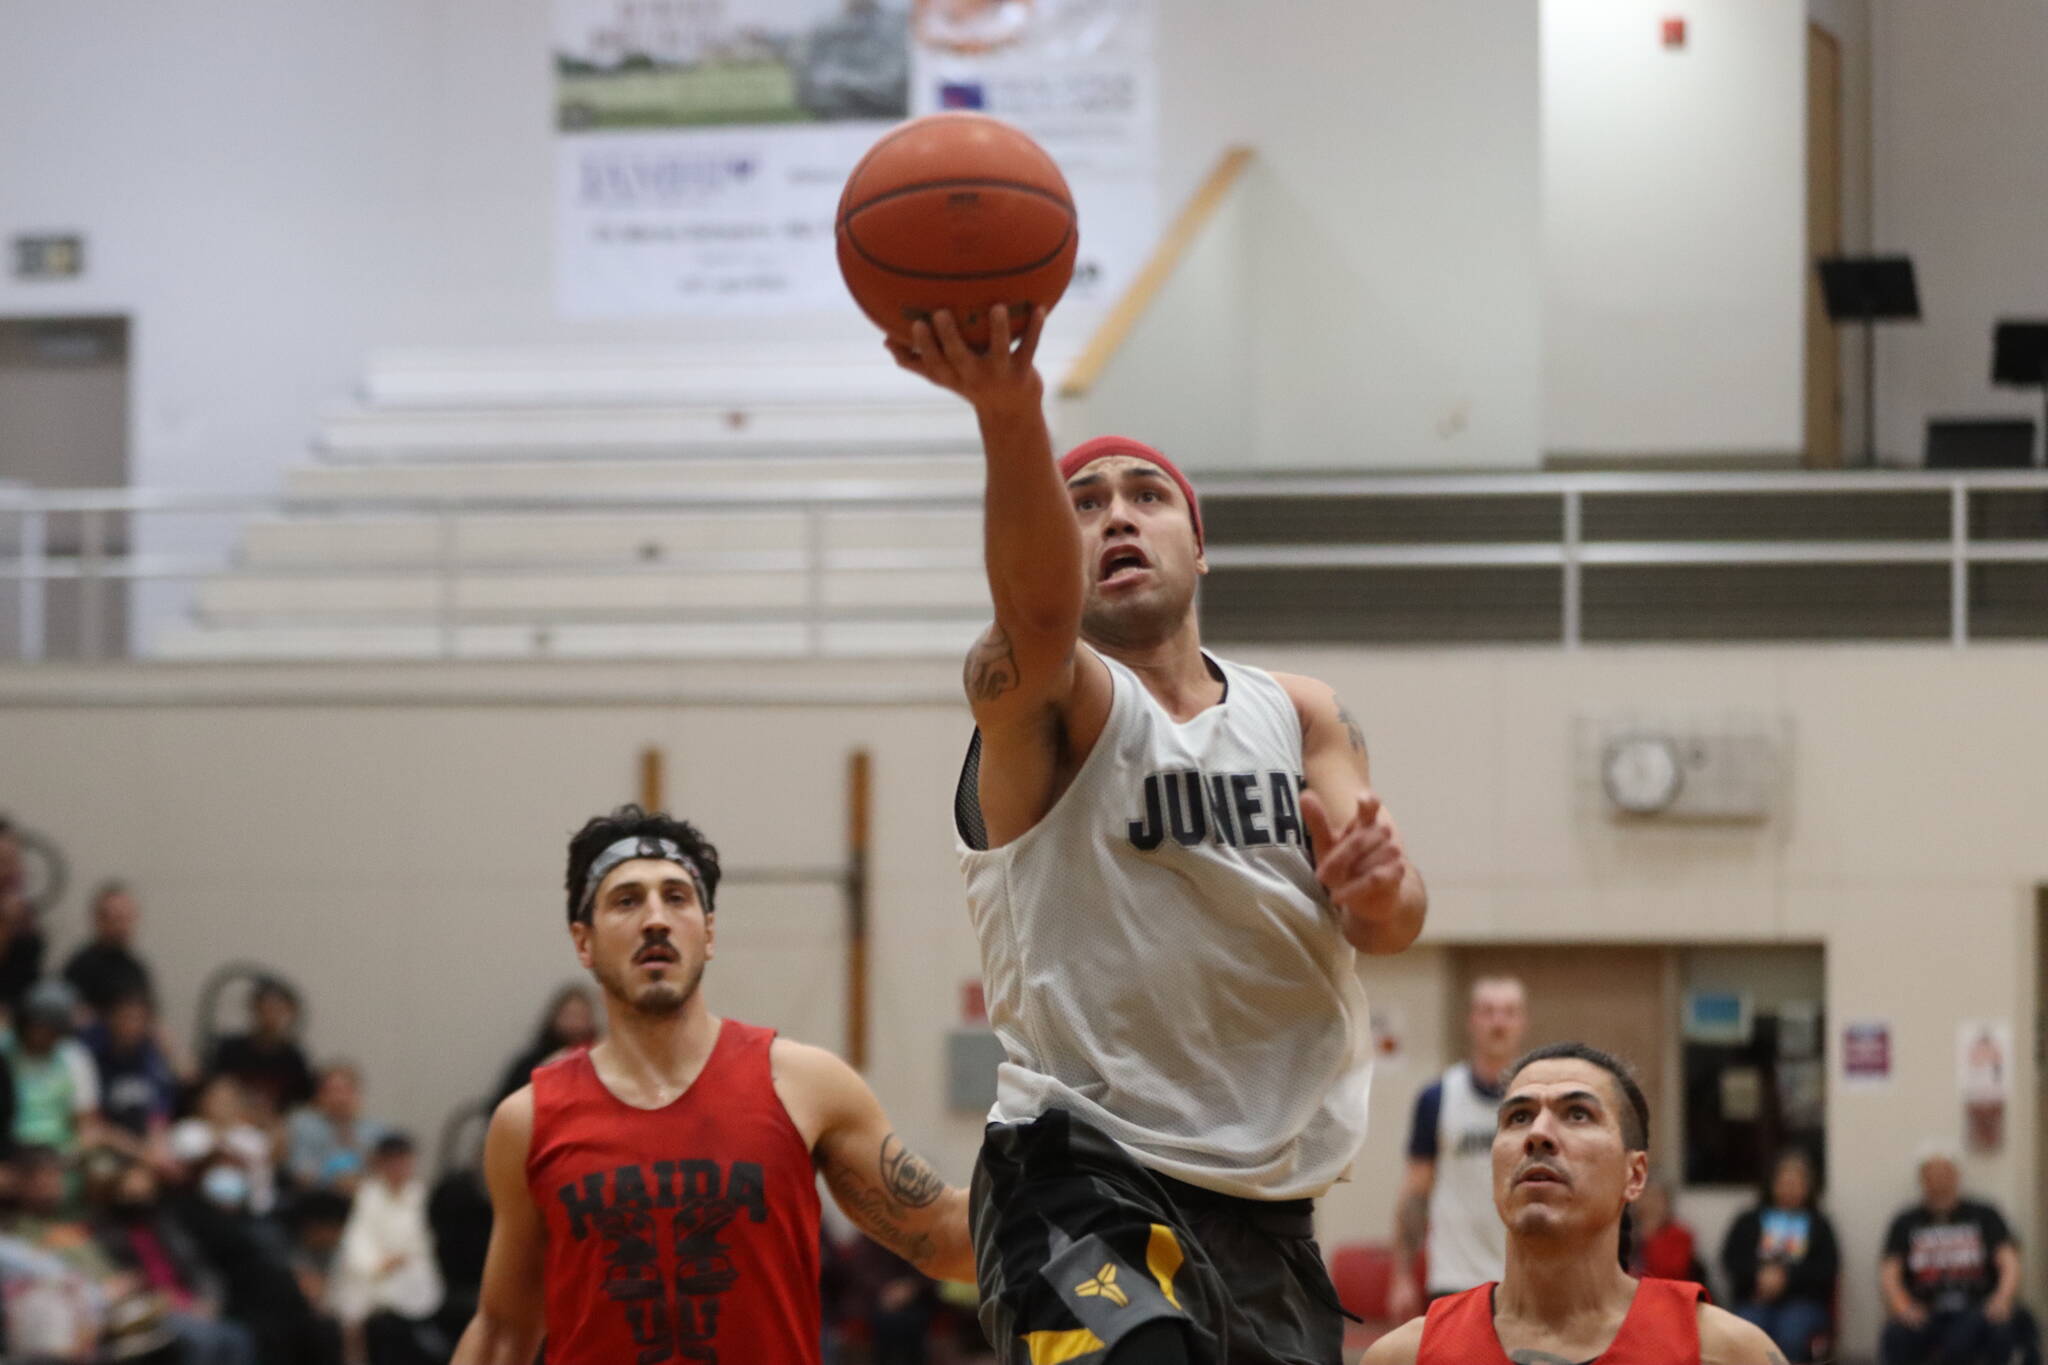 Juneau’s Terrence Wheat takes the ball to the basket for 2 points Saturday night against Hydaburg in the B bracket championship game for this year’s Gold Medal Basketball Tournament at JDHS. Wheat finished the game with 5 points. (Jonson Kuhn / Juneau Empire)